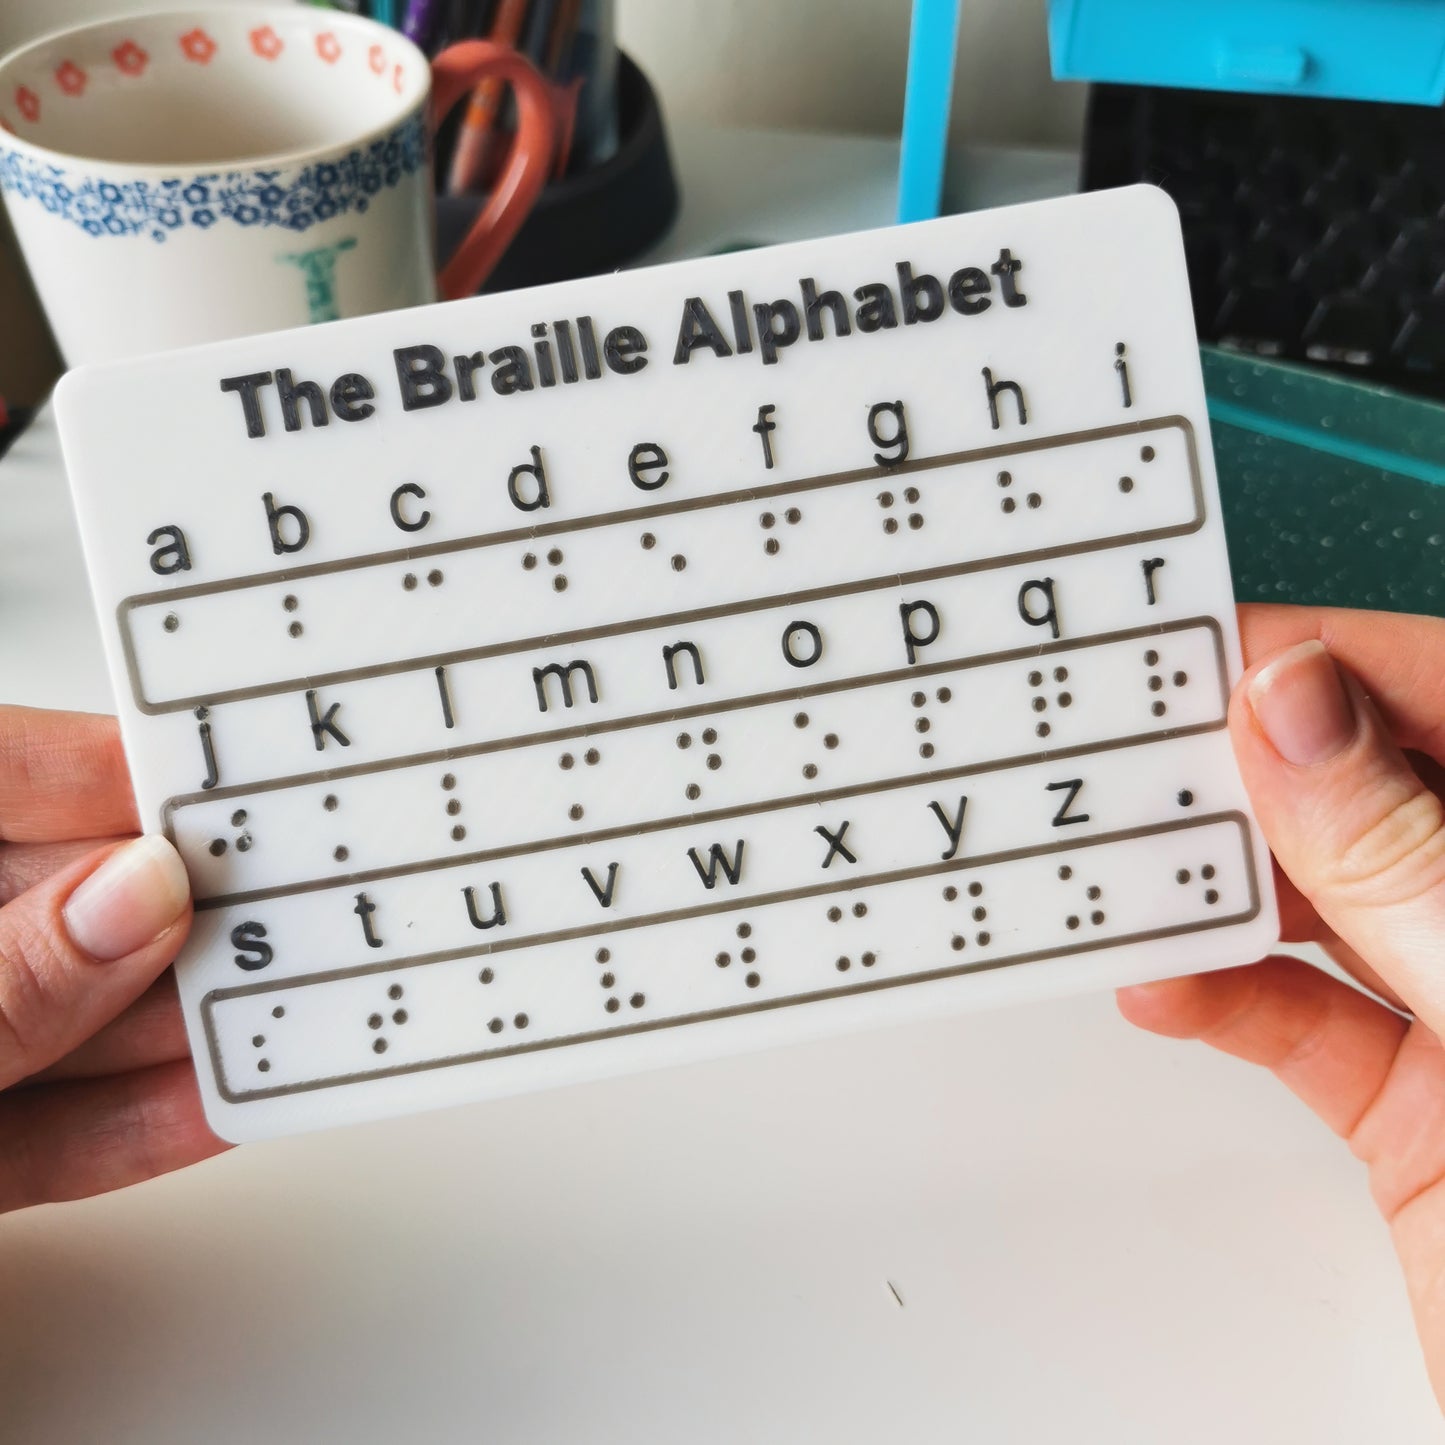 Braille alphabet learning board - Teaching Aid - Raised tactile board